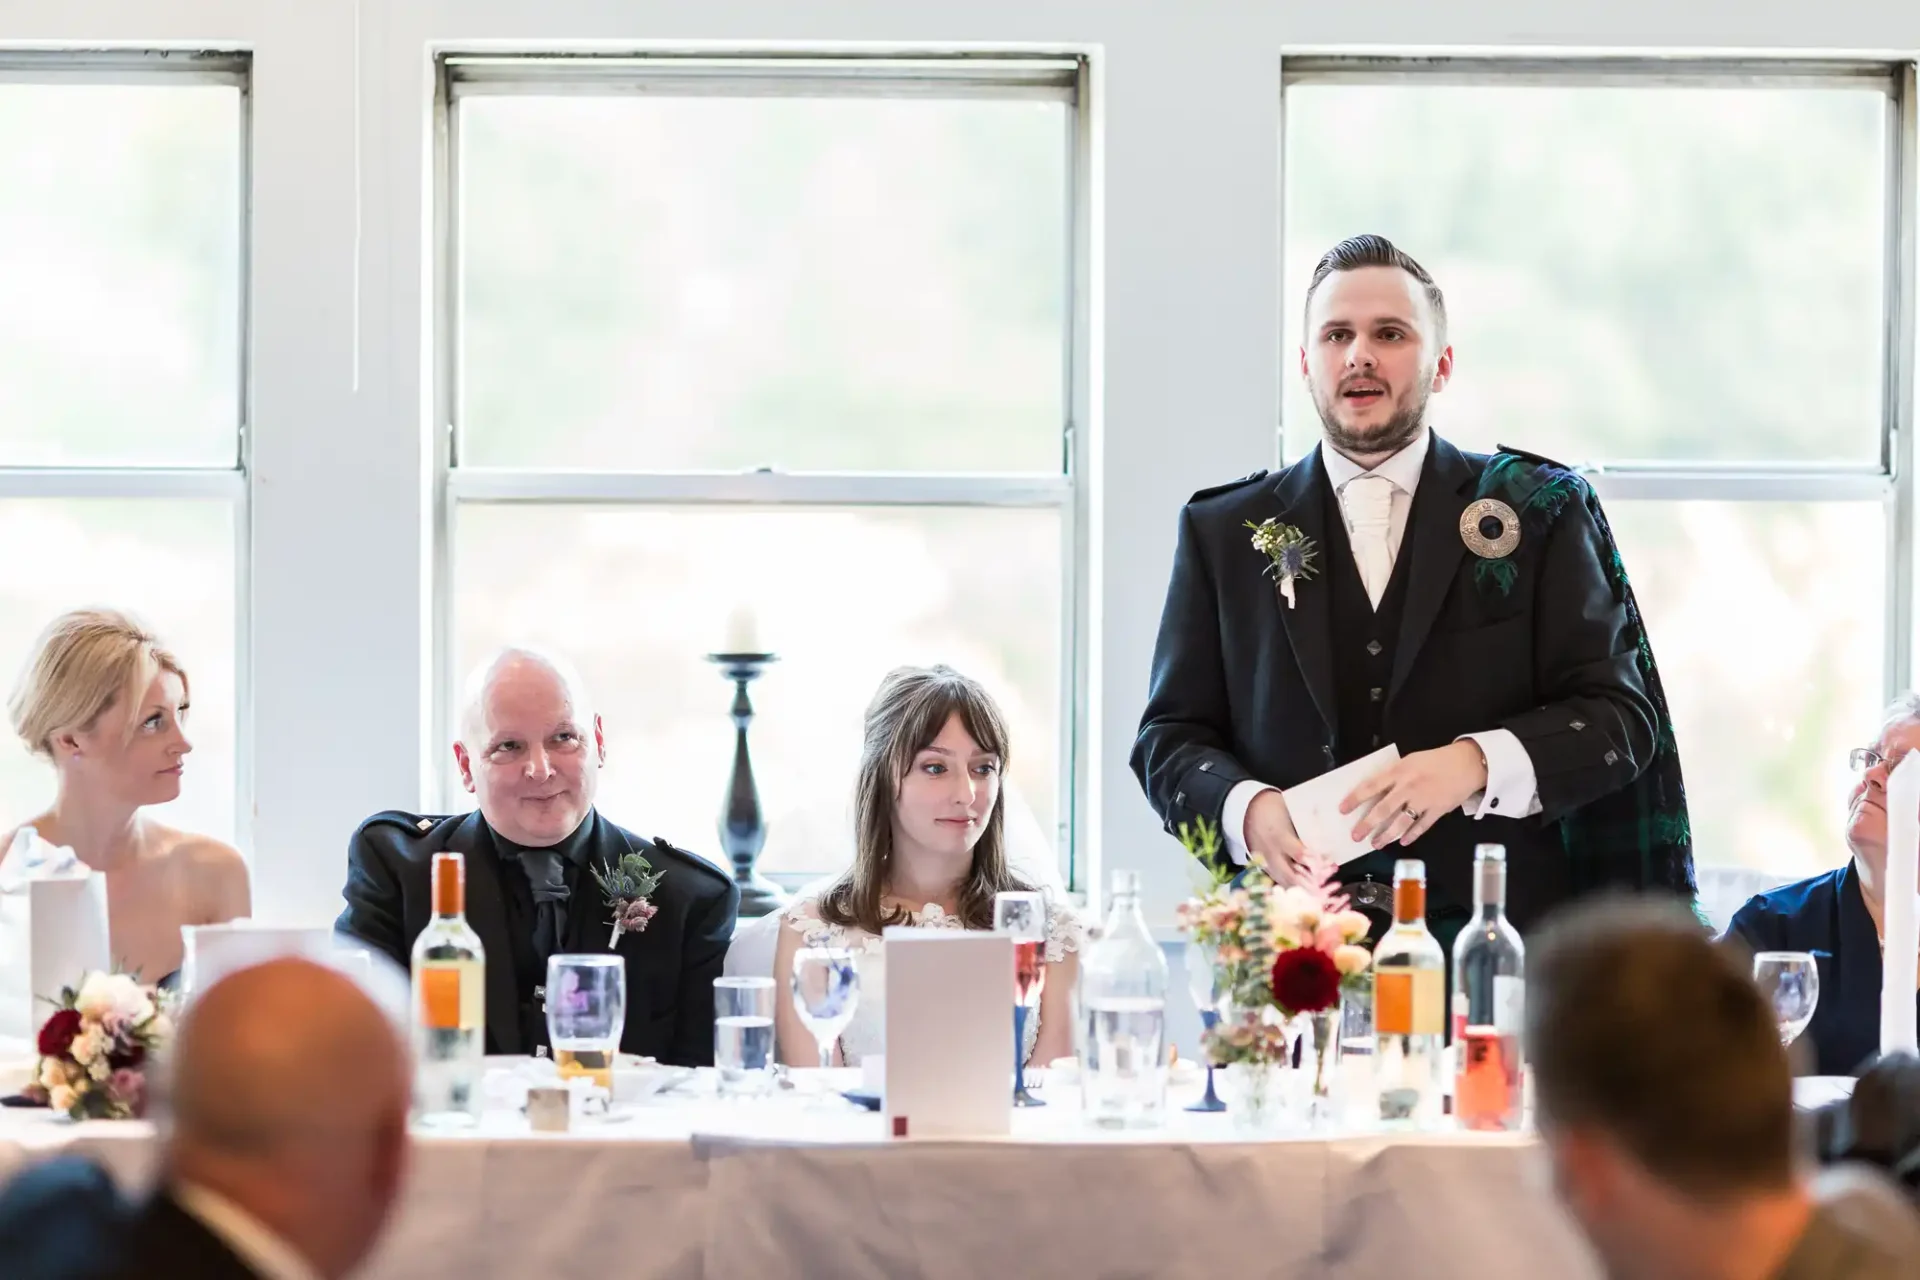 A man in a suit giving a speech at a wedding reception, surrounded by guests at a table.